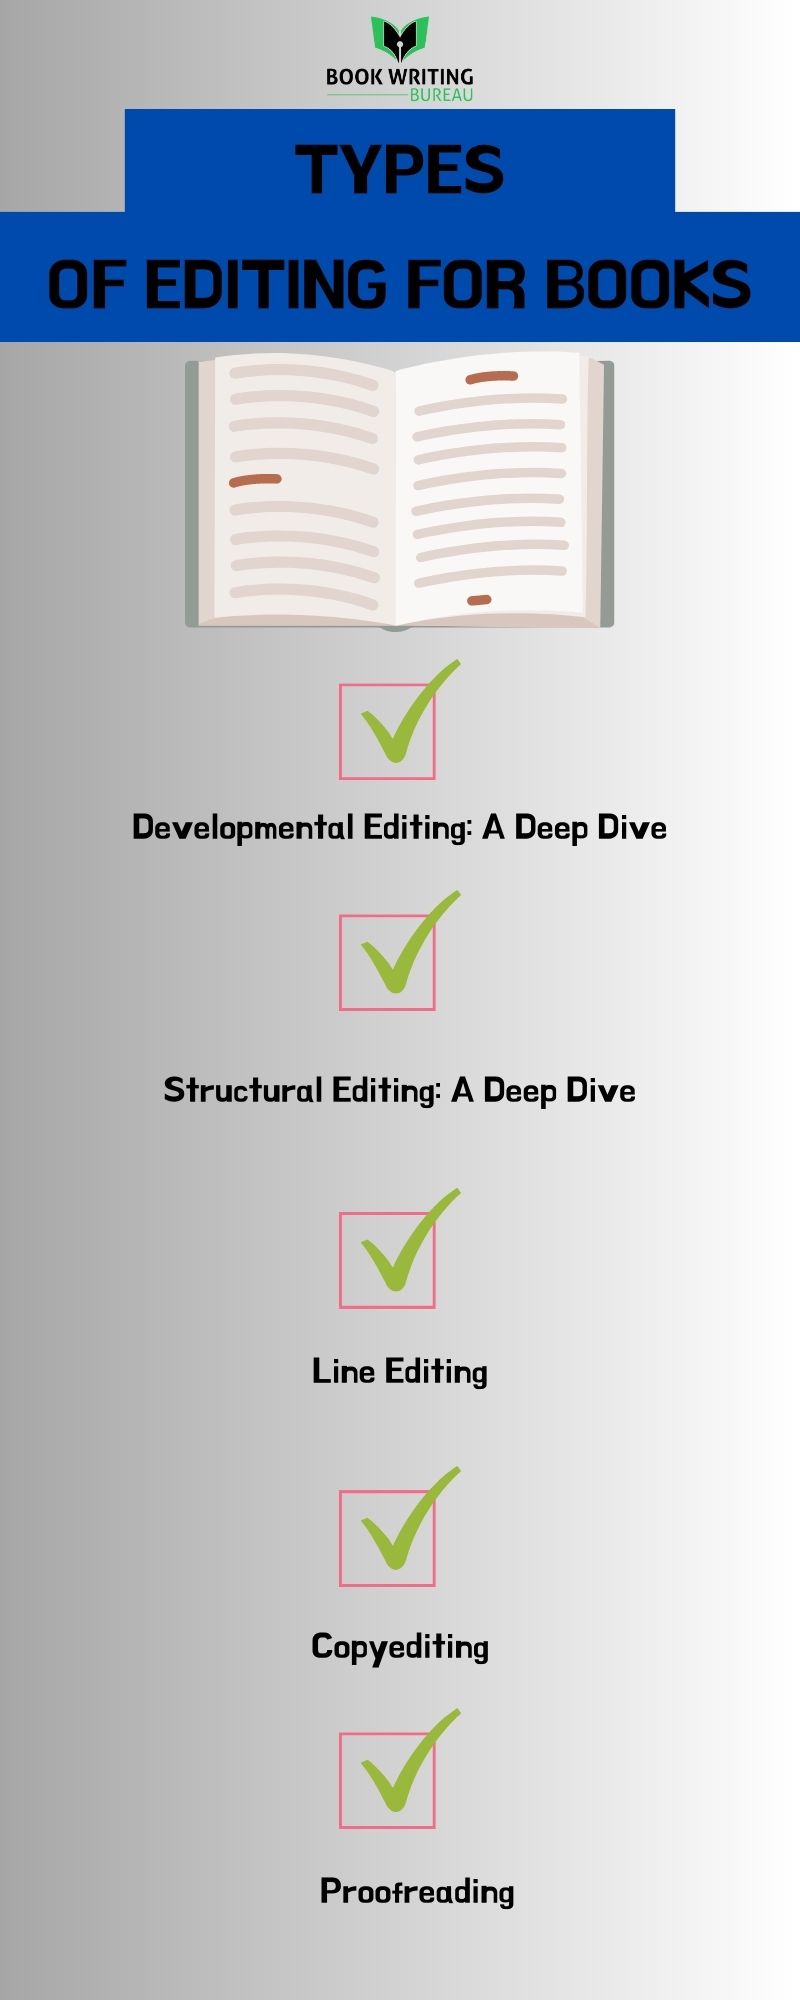 Different Types of Editing for Books